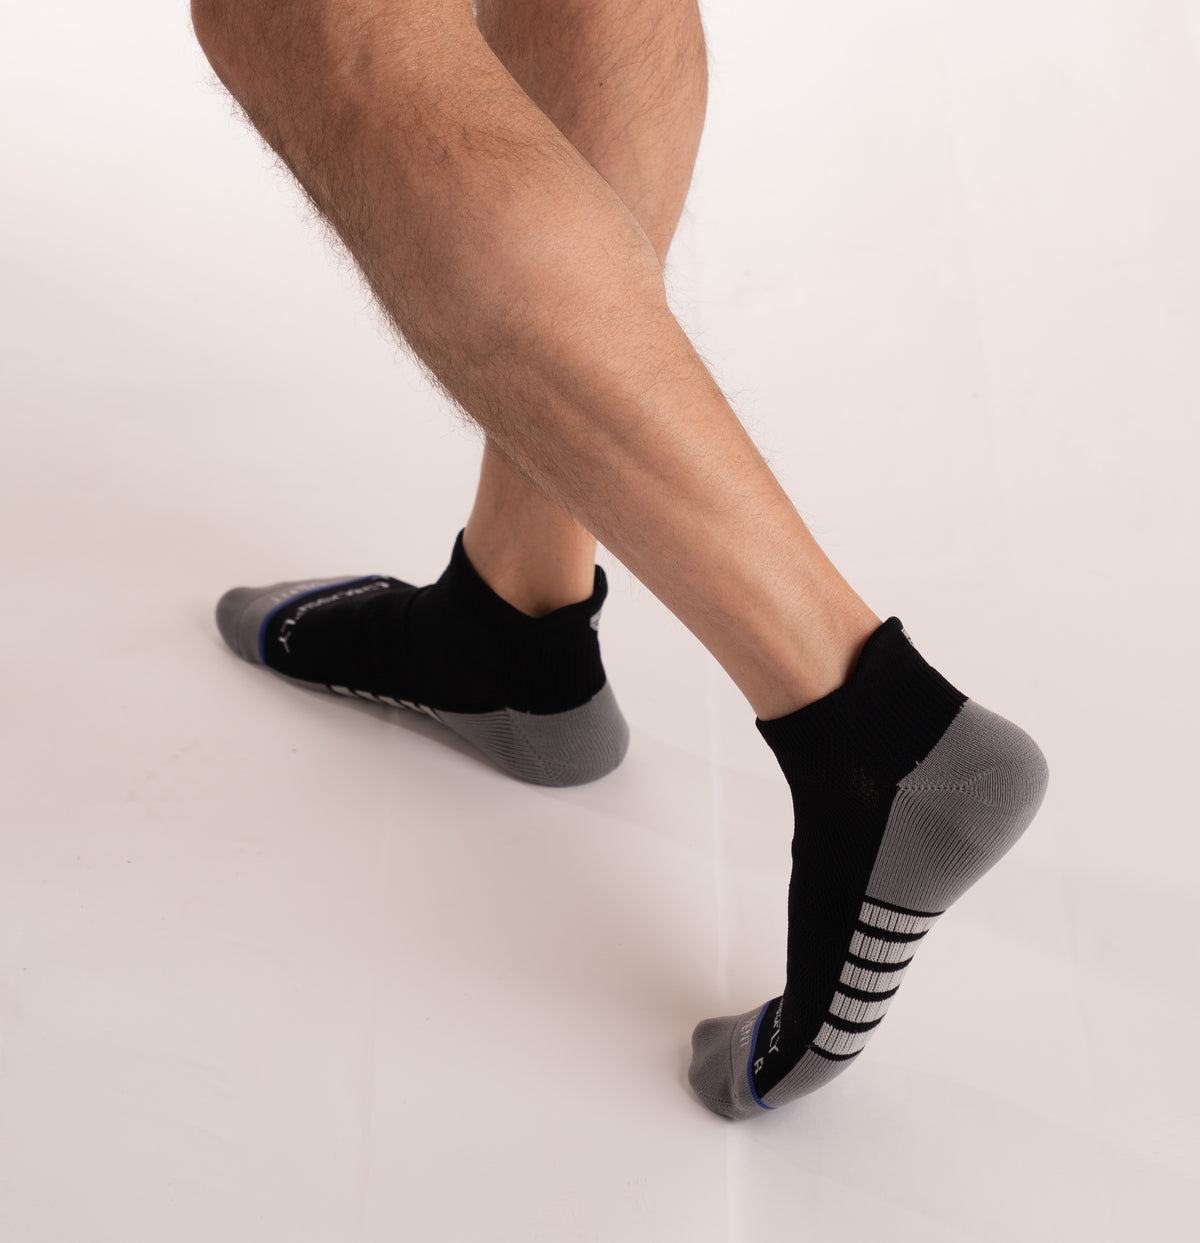 Crossfly men&#39;s Vent Low Socks in black / grey from the Performance series, featuring AirVent and AirBeams.